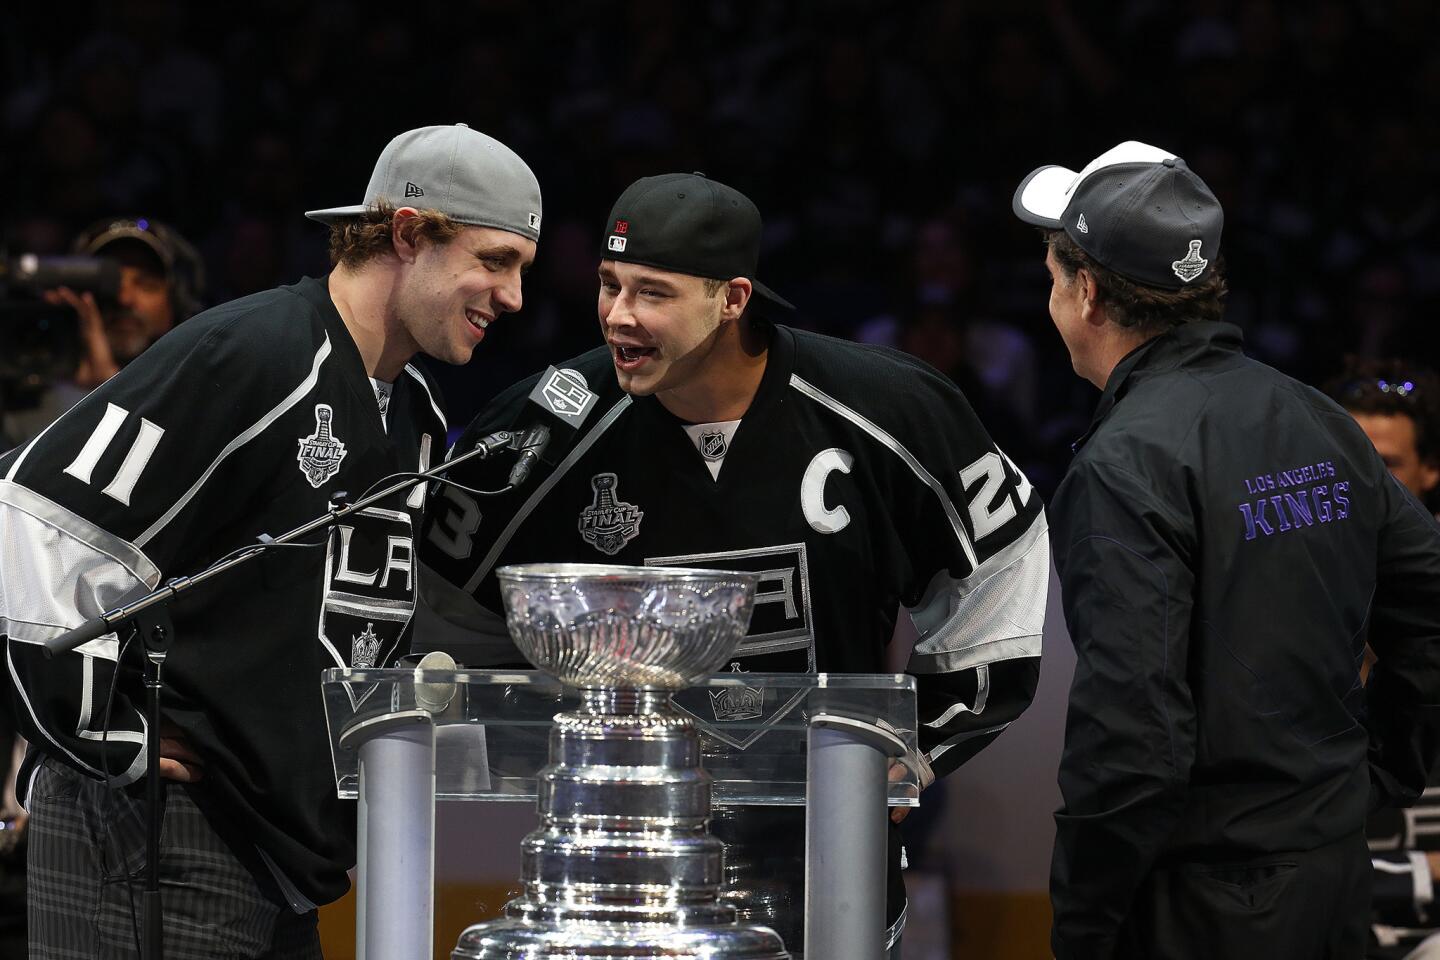 The Kings' Anze Kopitar, left, and Dustin Brown, center, with general manager Dean Lombardi during the rally at Staples Center.